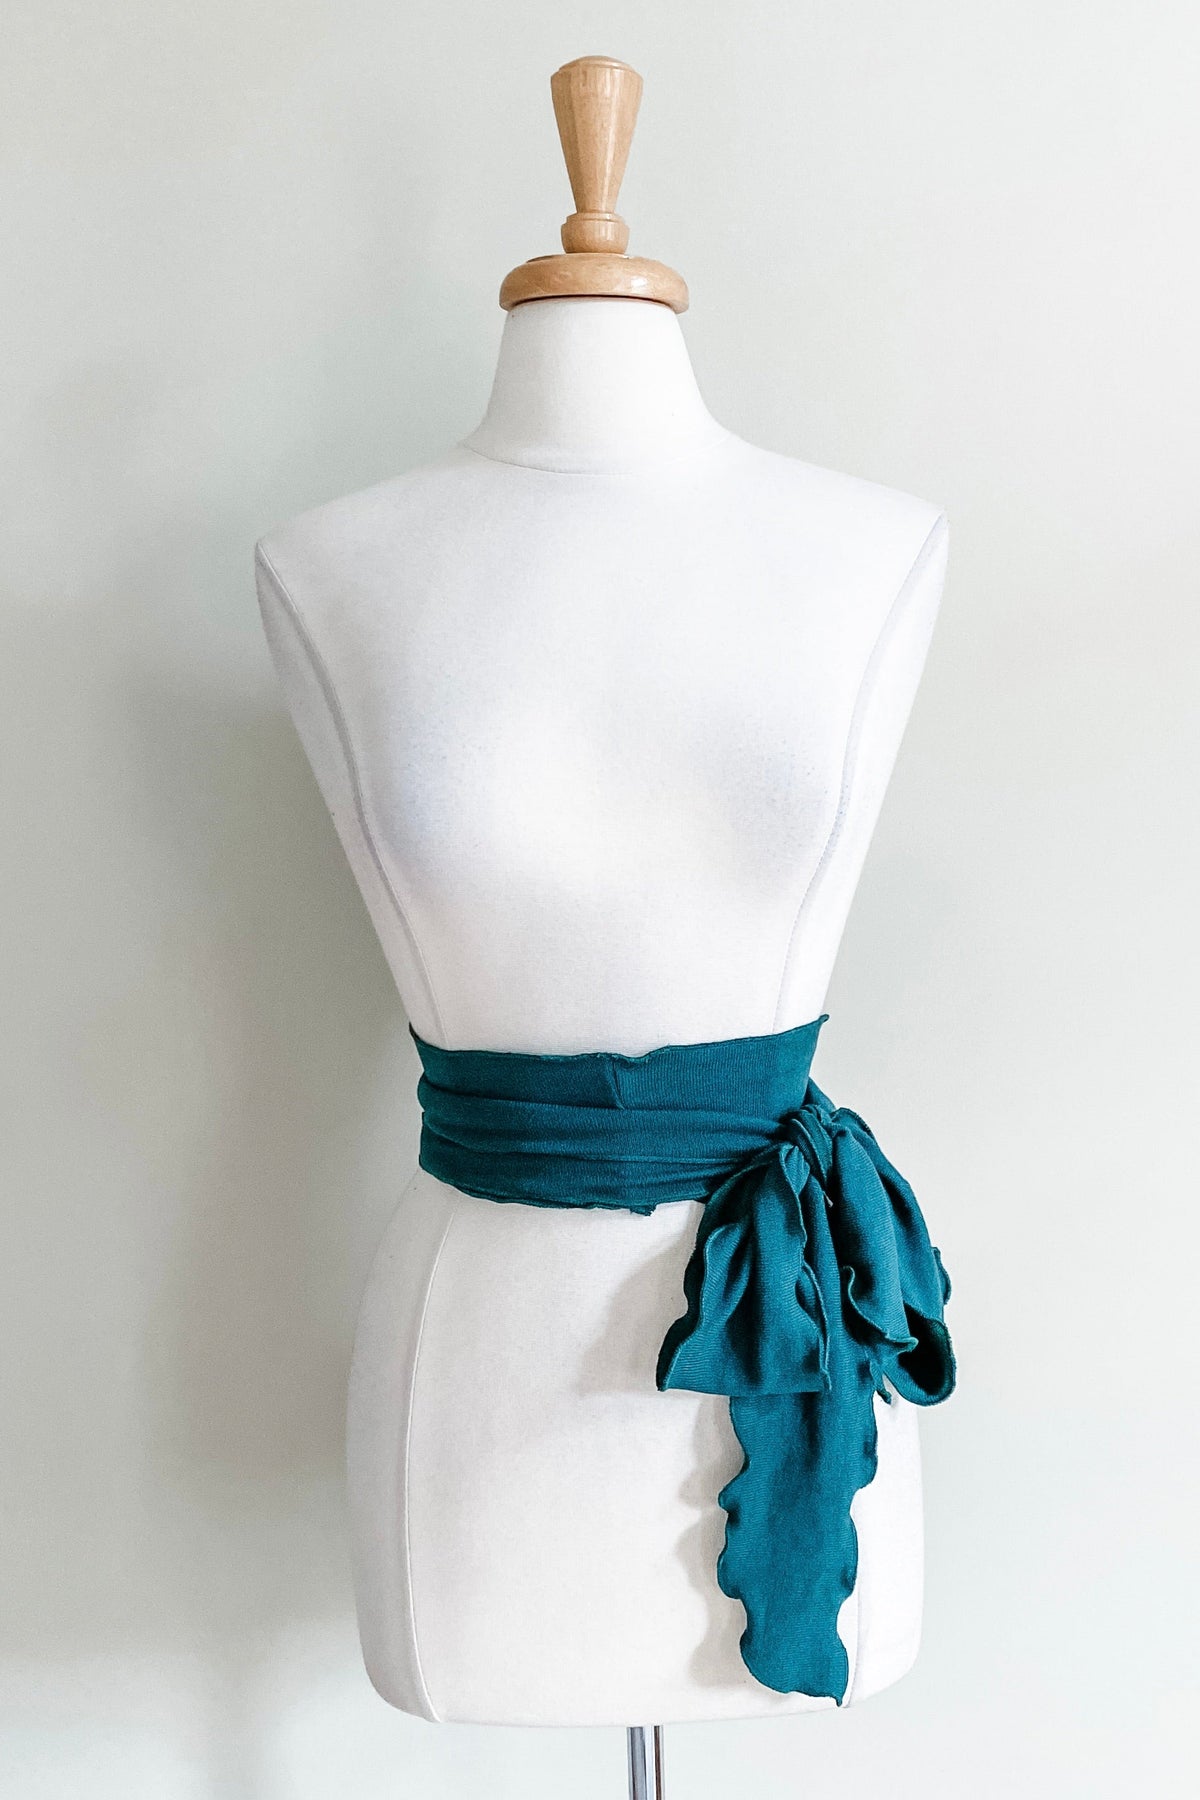 Matching Sash in Teal color from Diane Kroe